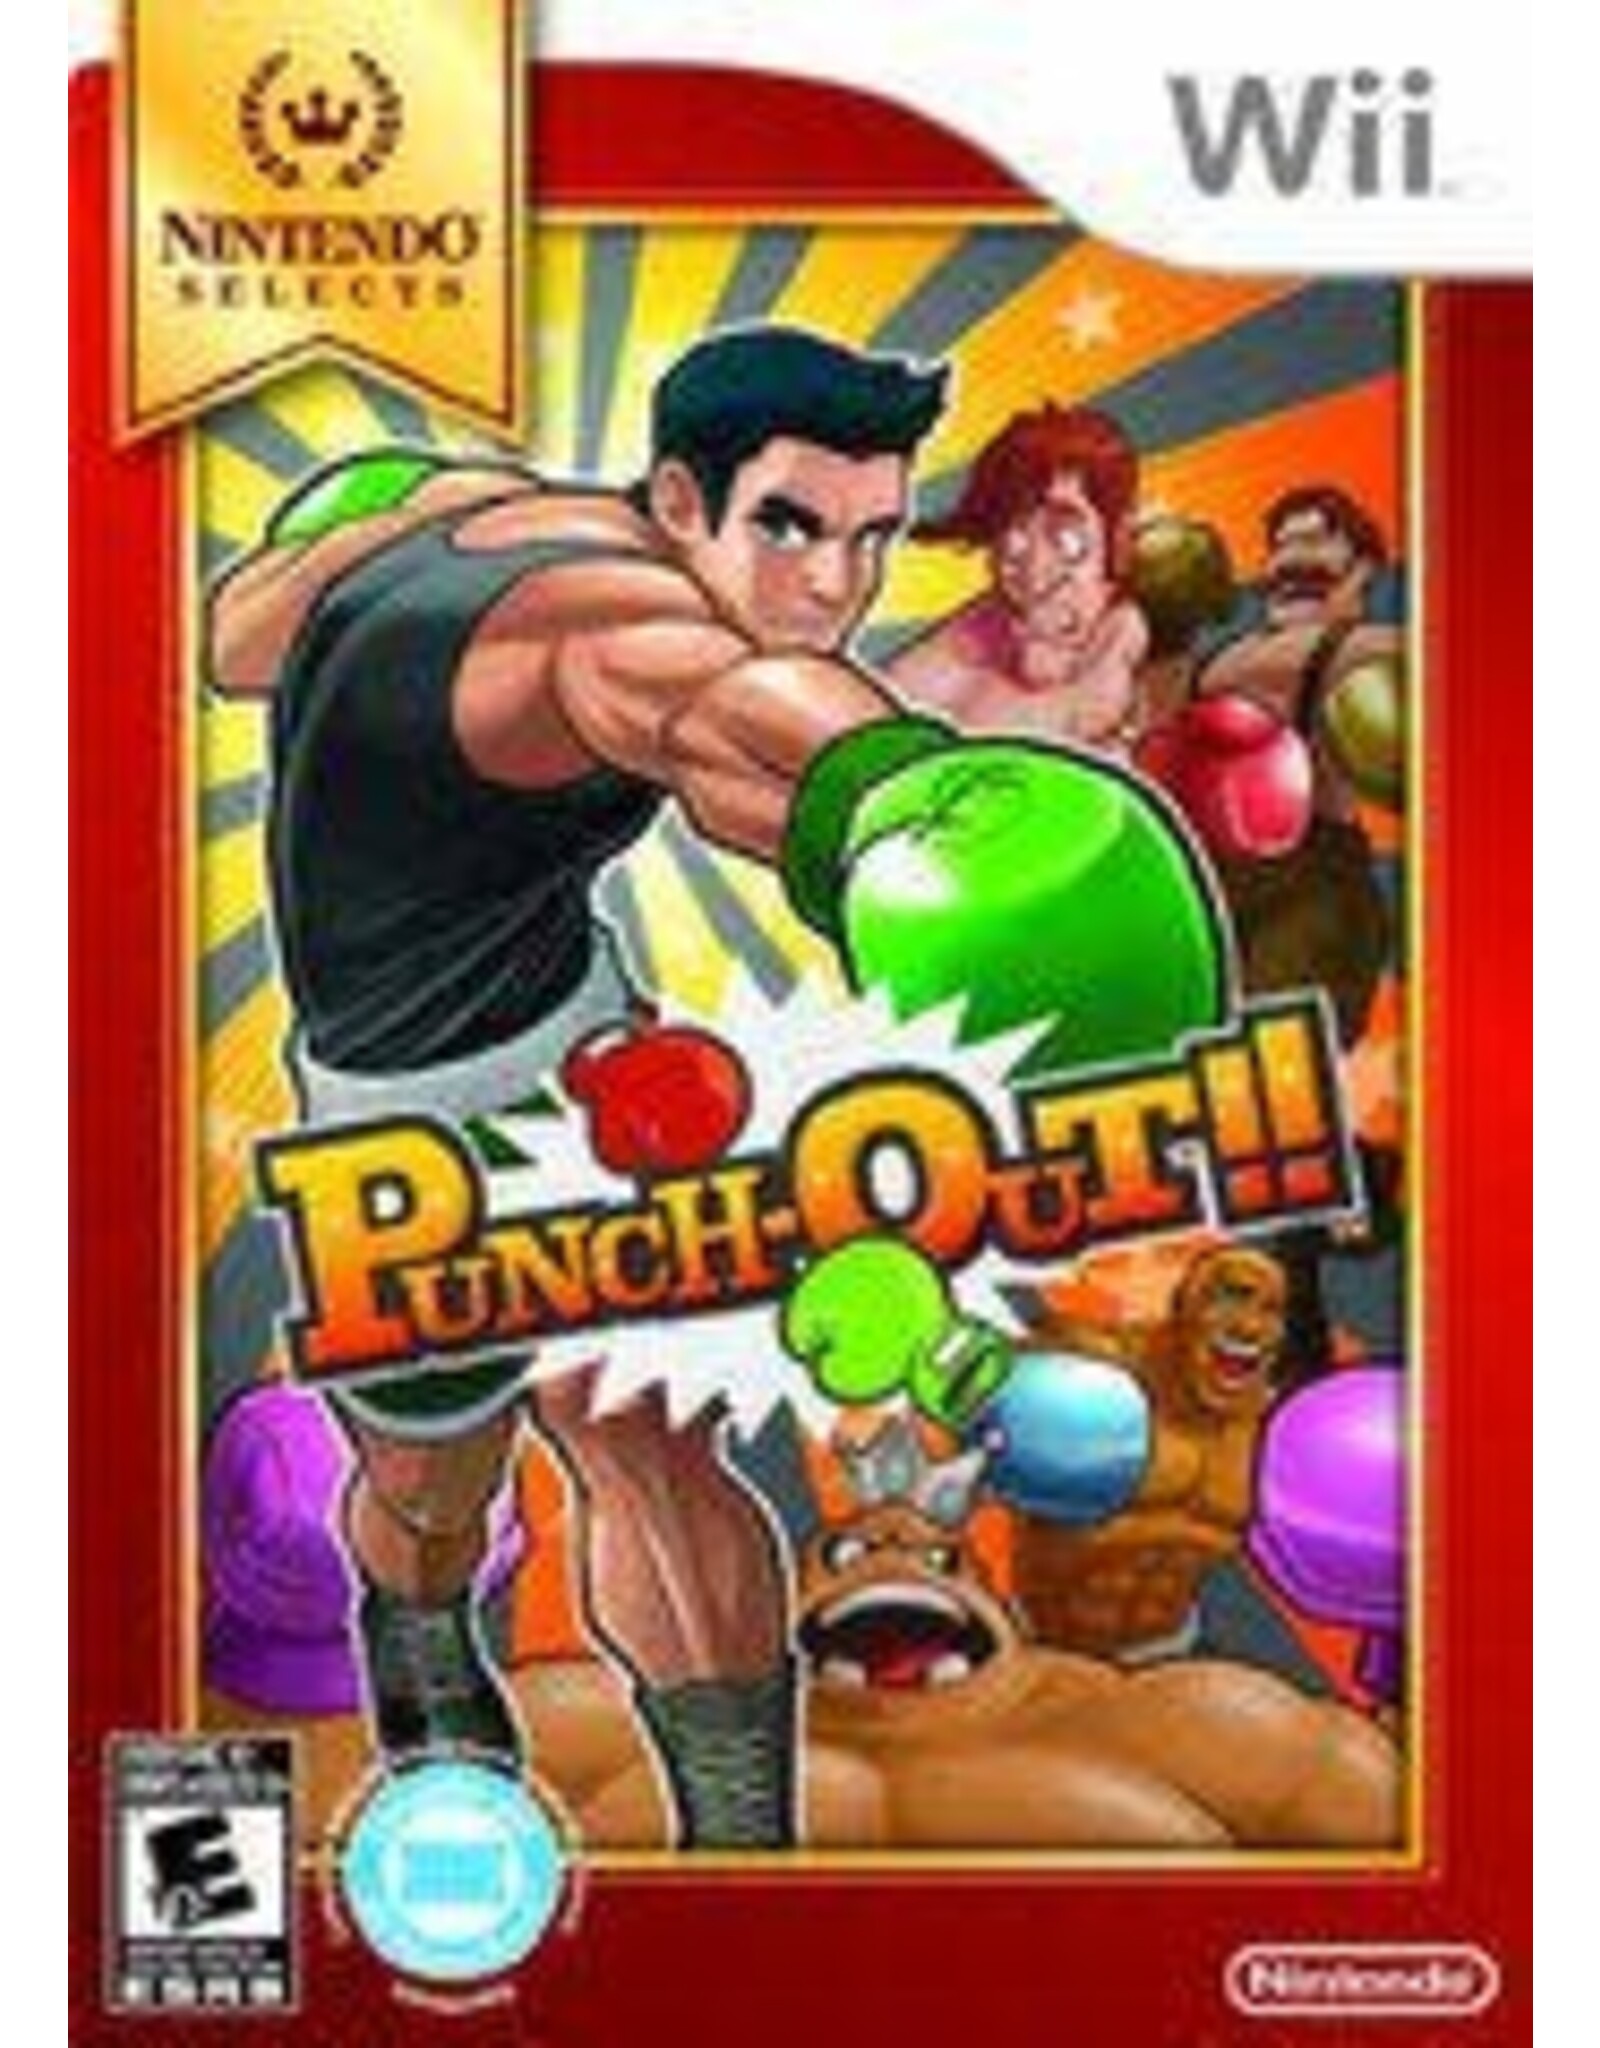 Wii Punch-Out (Nintendo Selects, CiB)